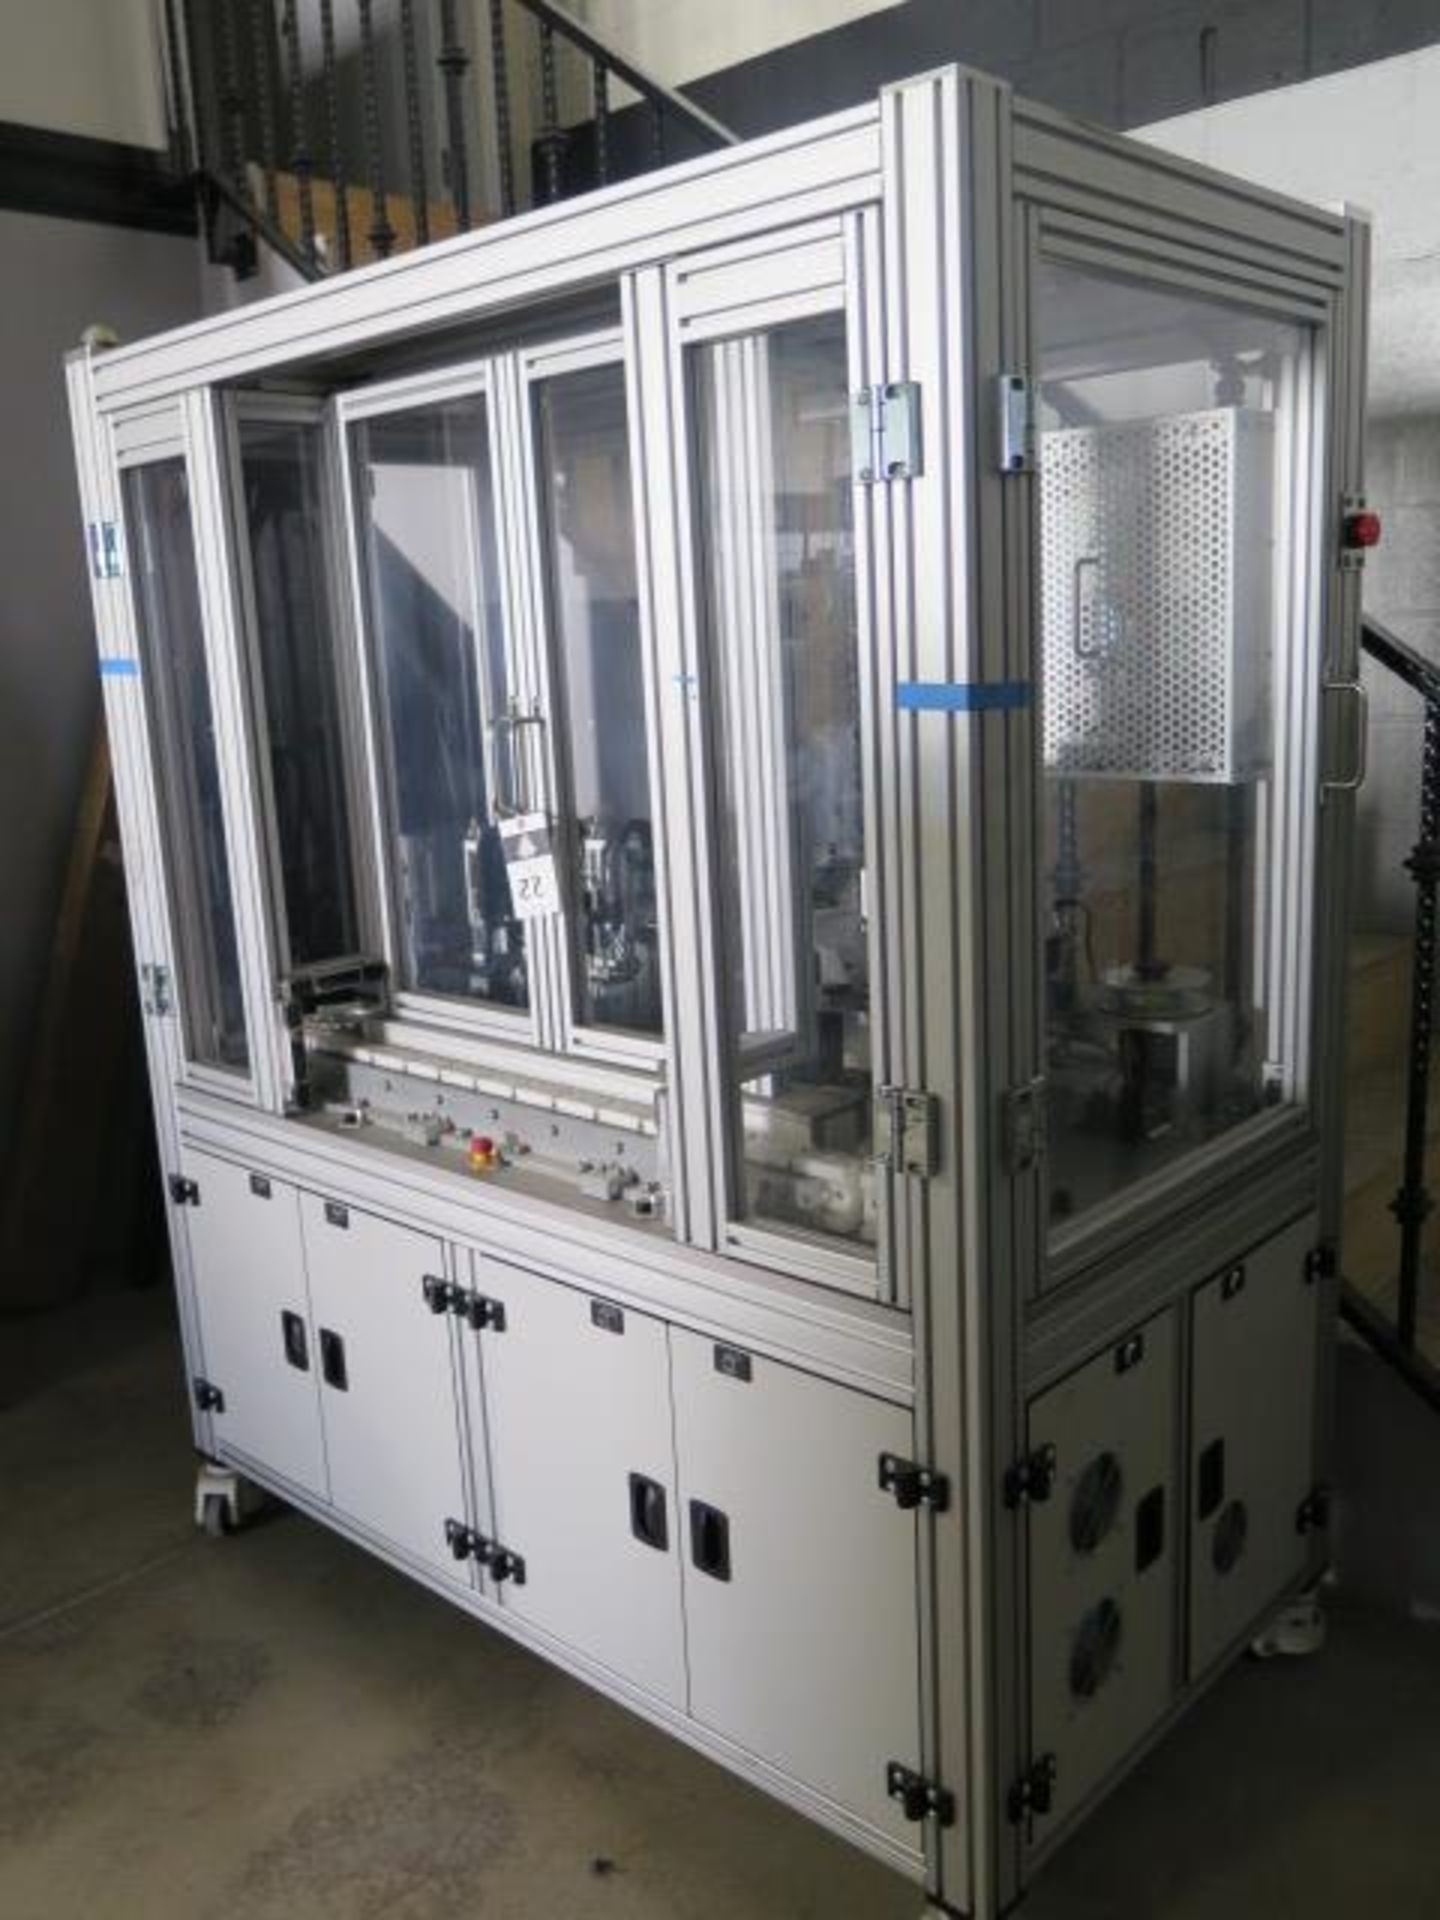 Automated Vitamin D Machine Line w/ PLC Controls, Tube and Cap Feeders, Enclosure SOLD AS-IS - Image 3 of 20